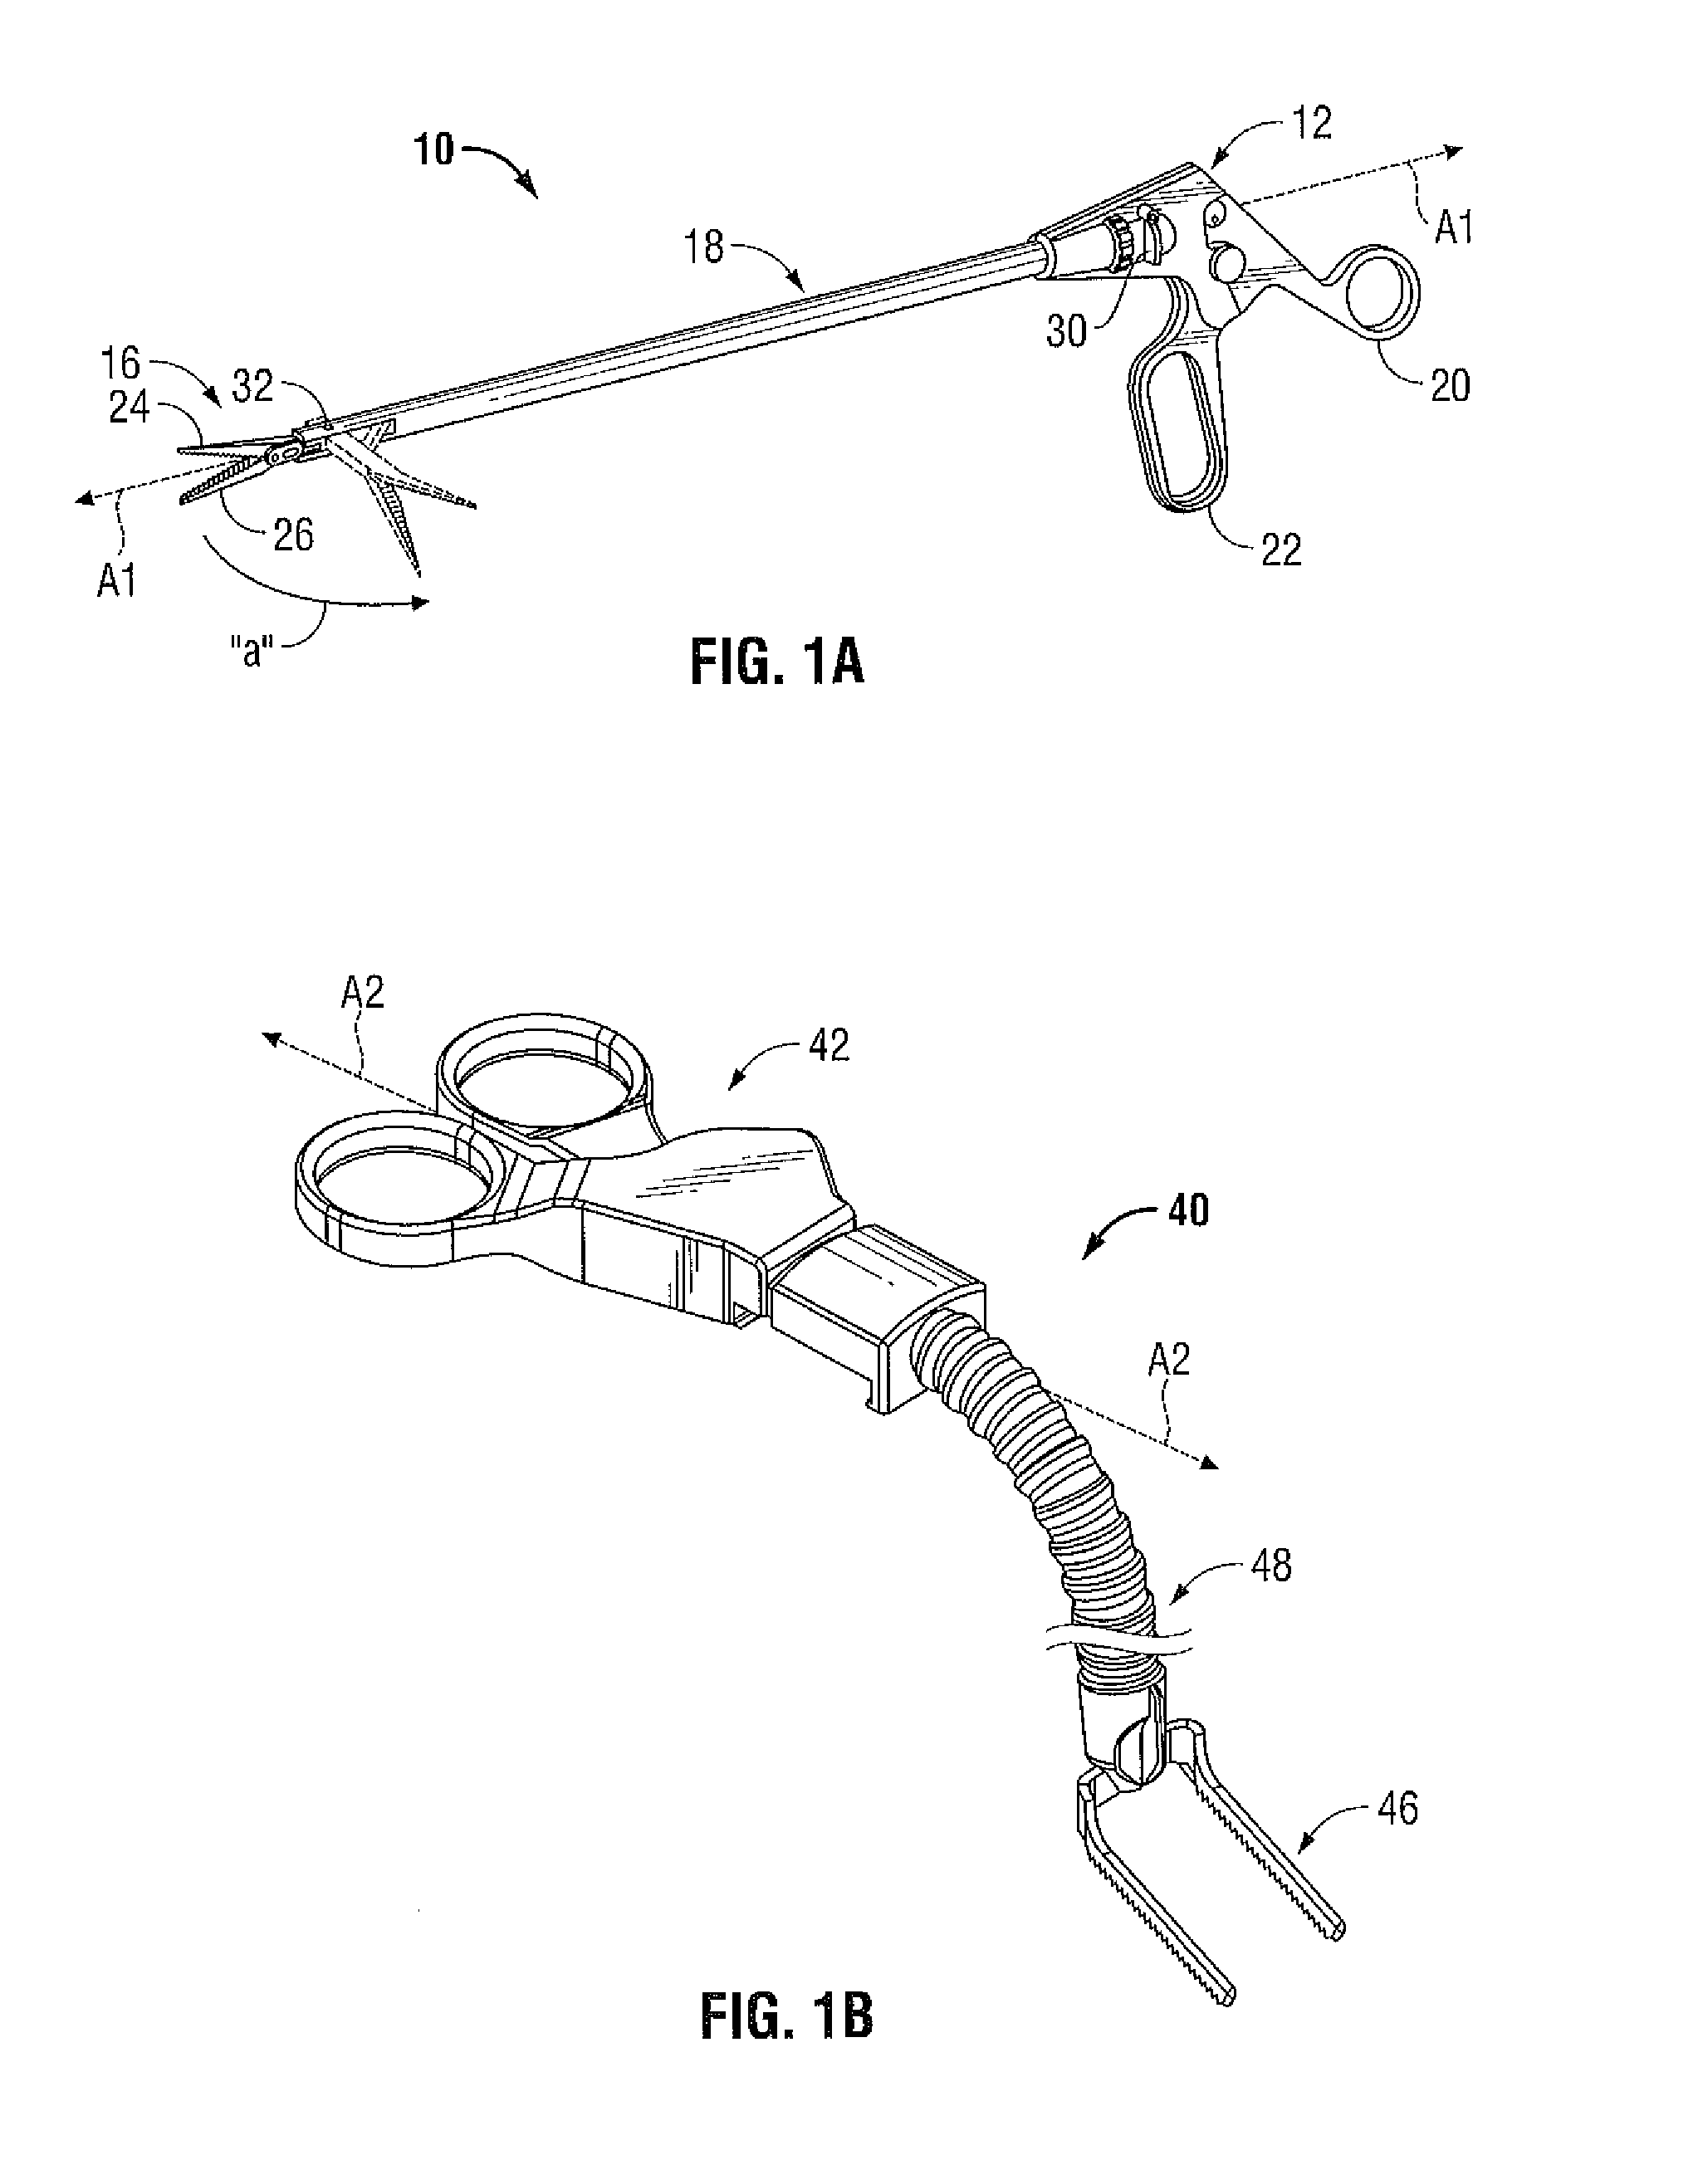 Method of Transferring Pressure in an Articulating Surgical Instrument